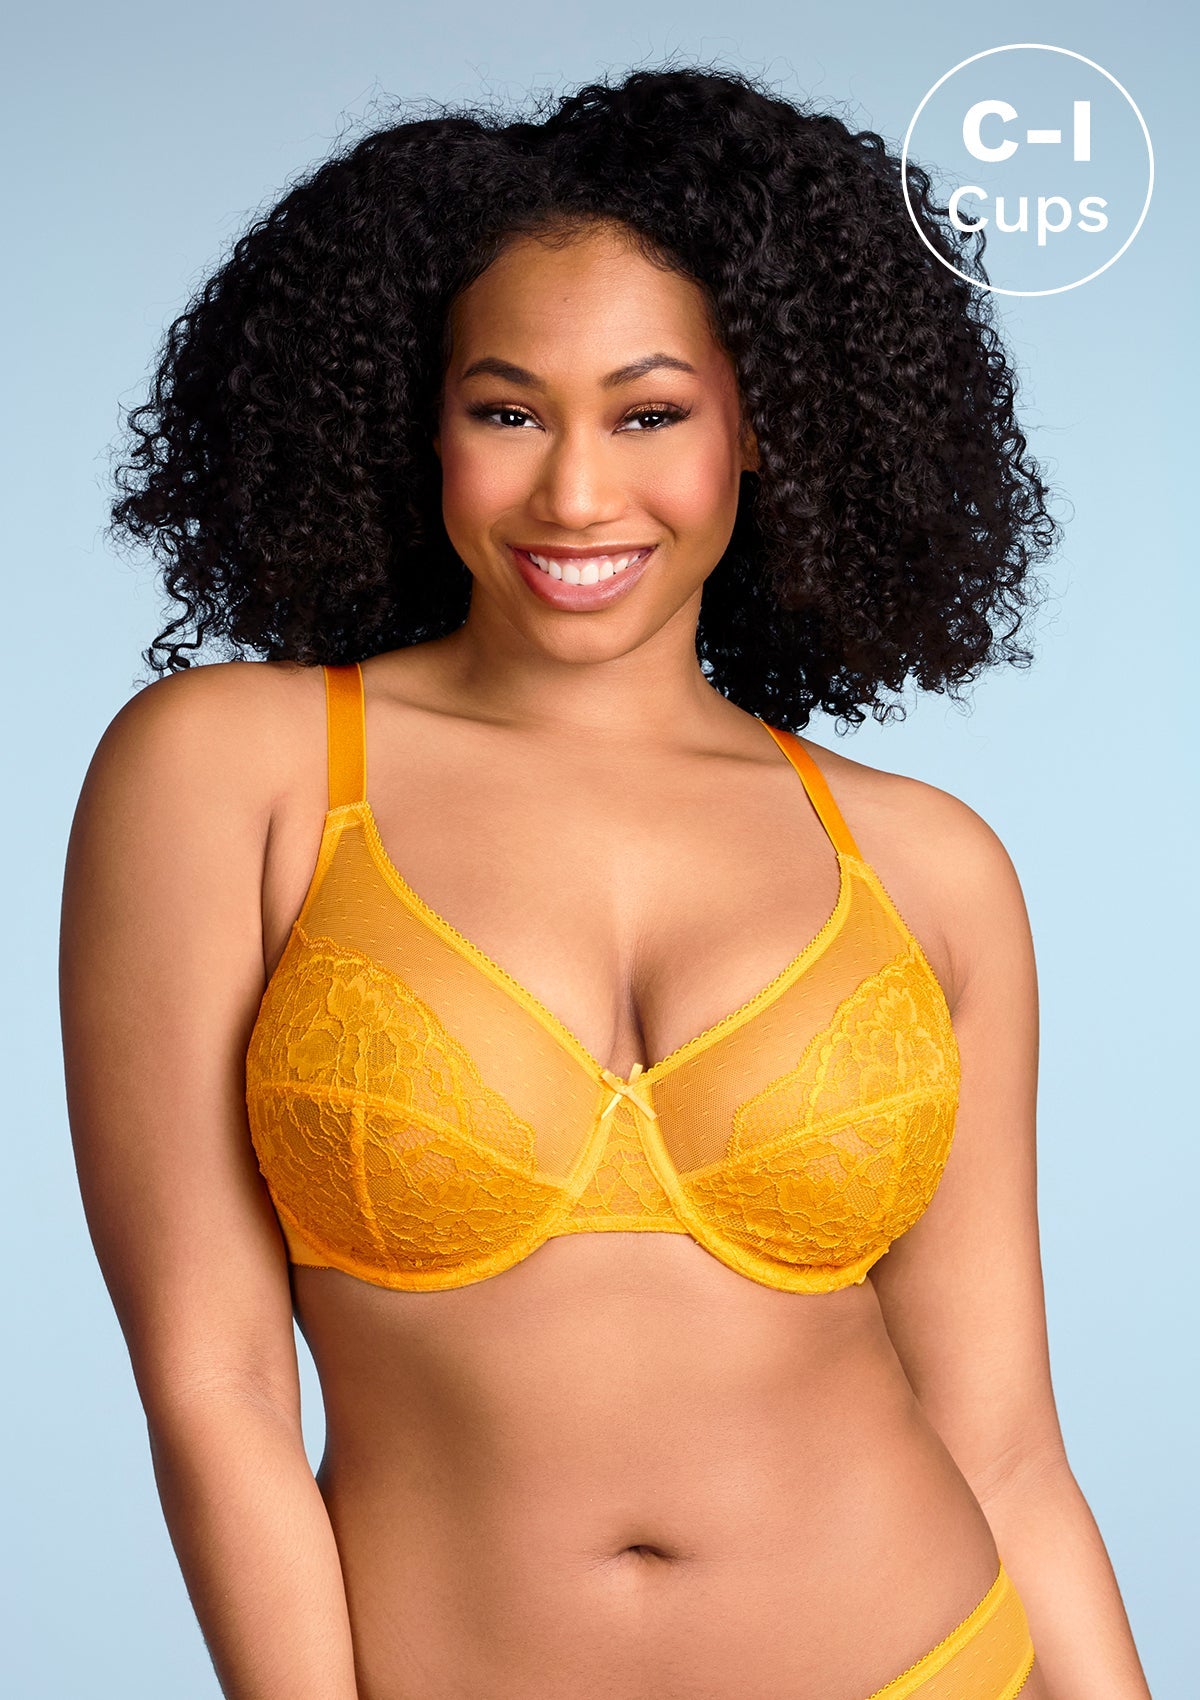 HSIA Enchante Bra And Panty Sets: Unpadded Bra With Back Support - Cadmium Yellow / 34 / H